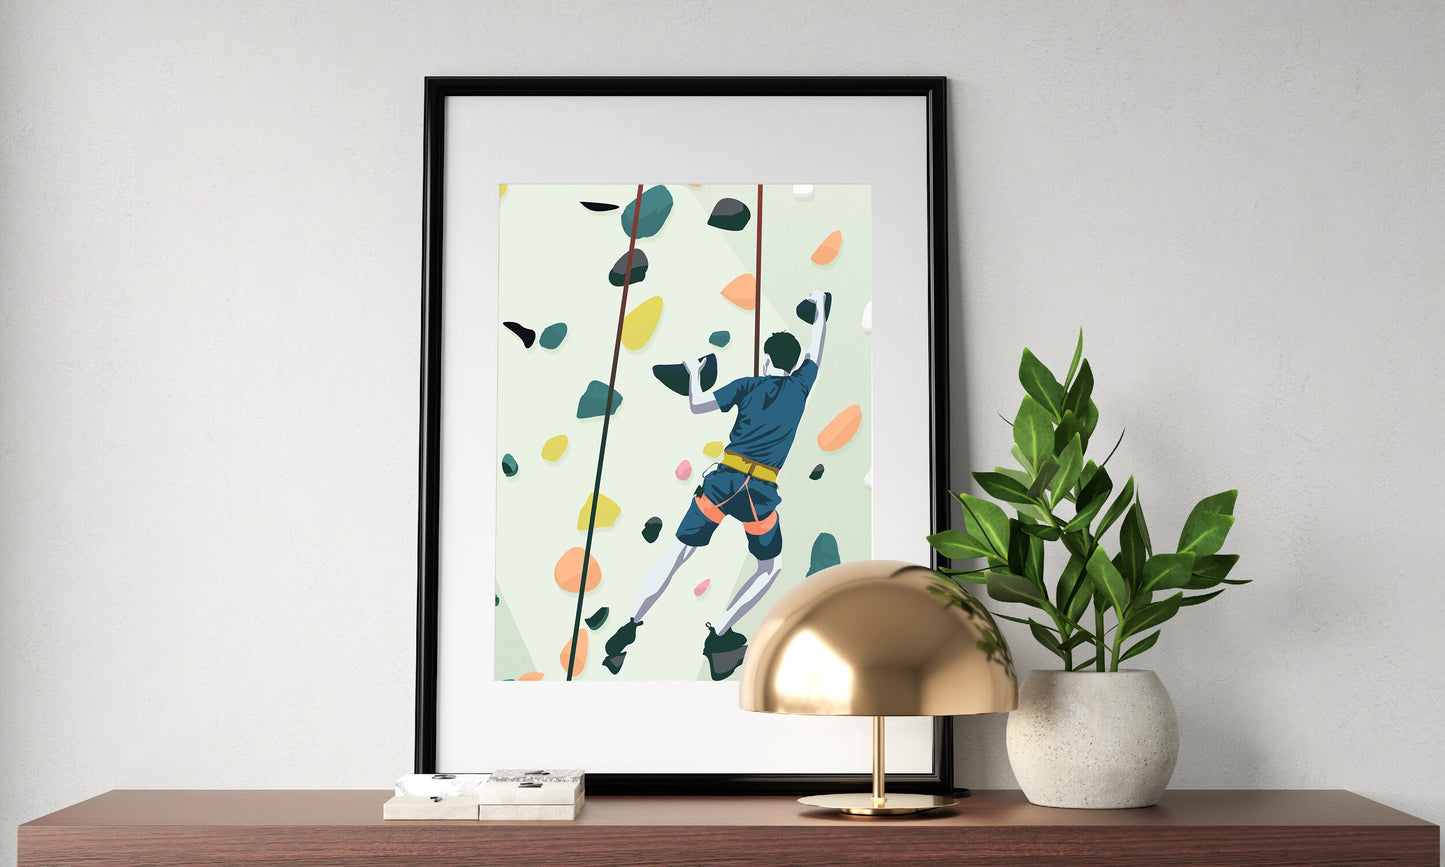 Climbing posters x 2 for women and men | Climbing poster | Sports Artist